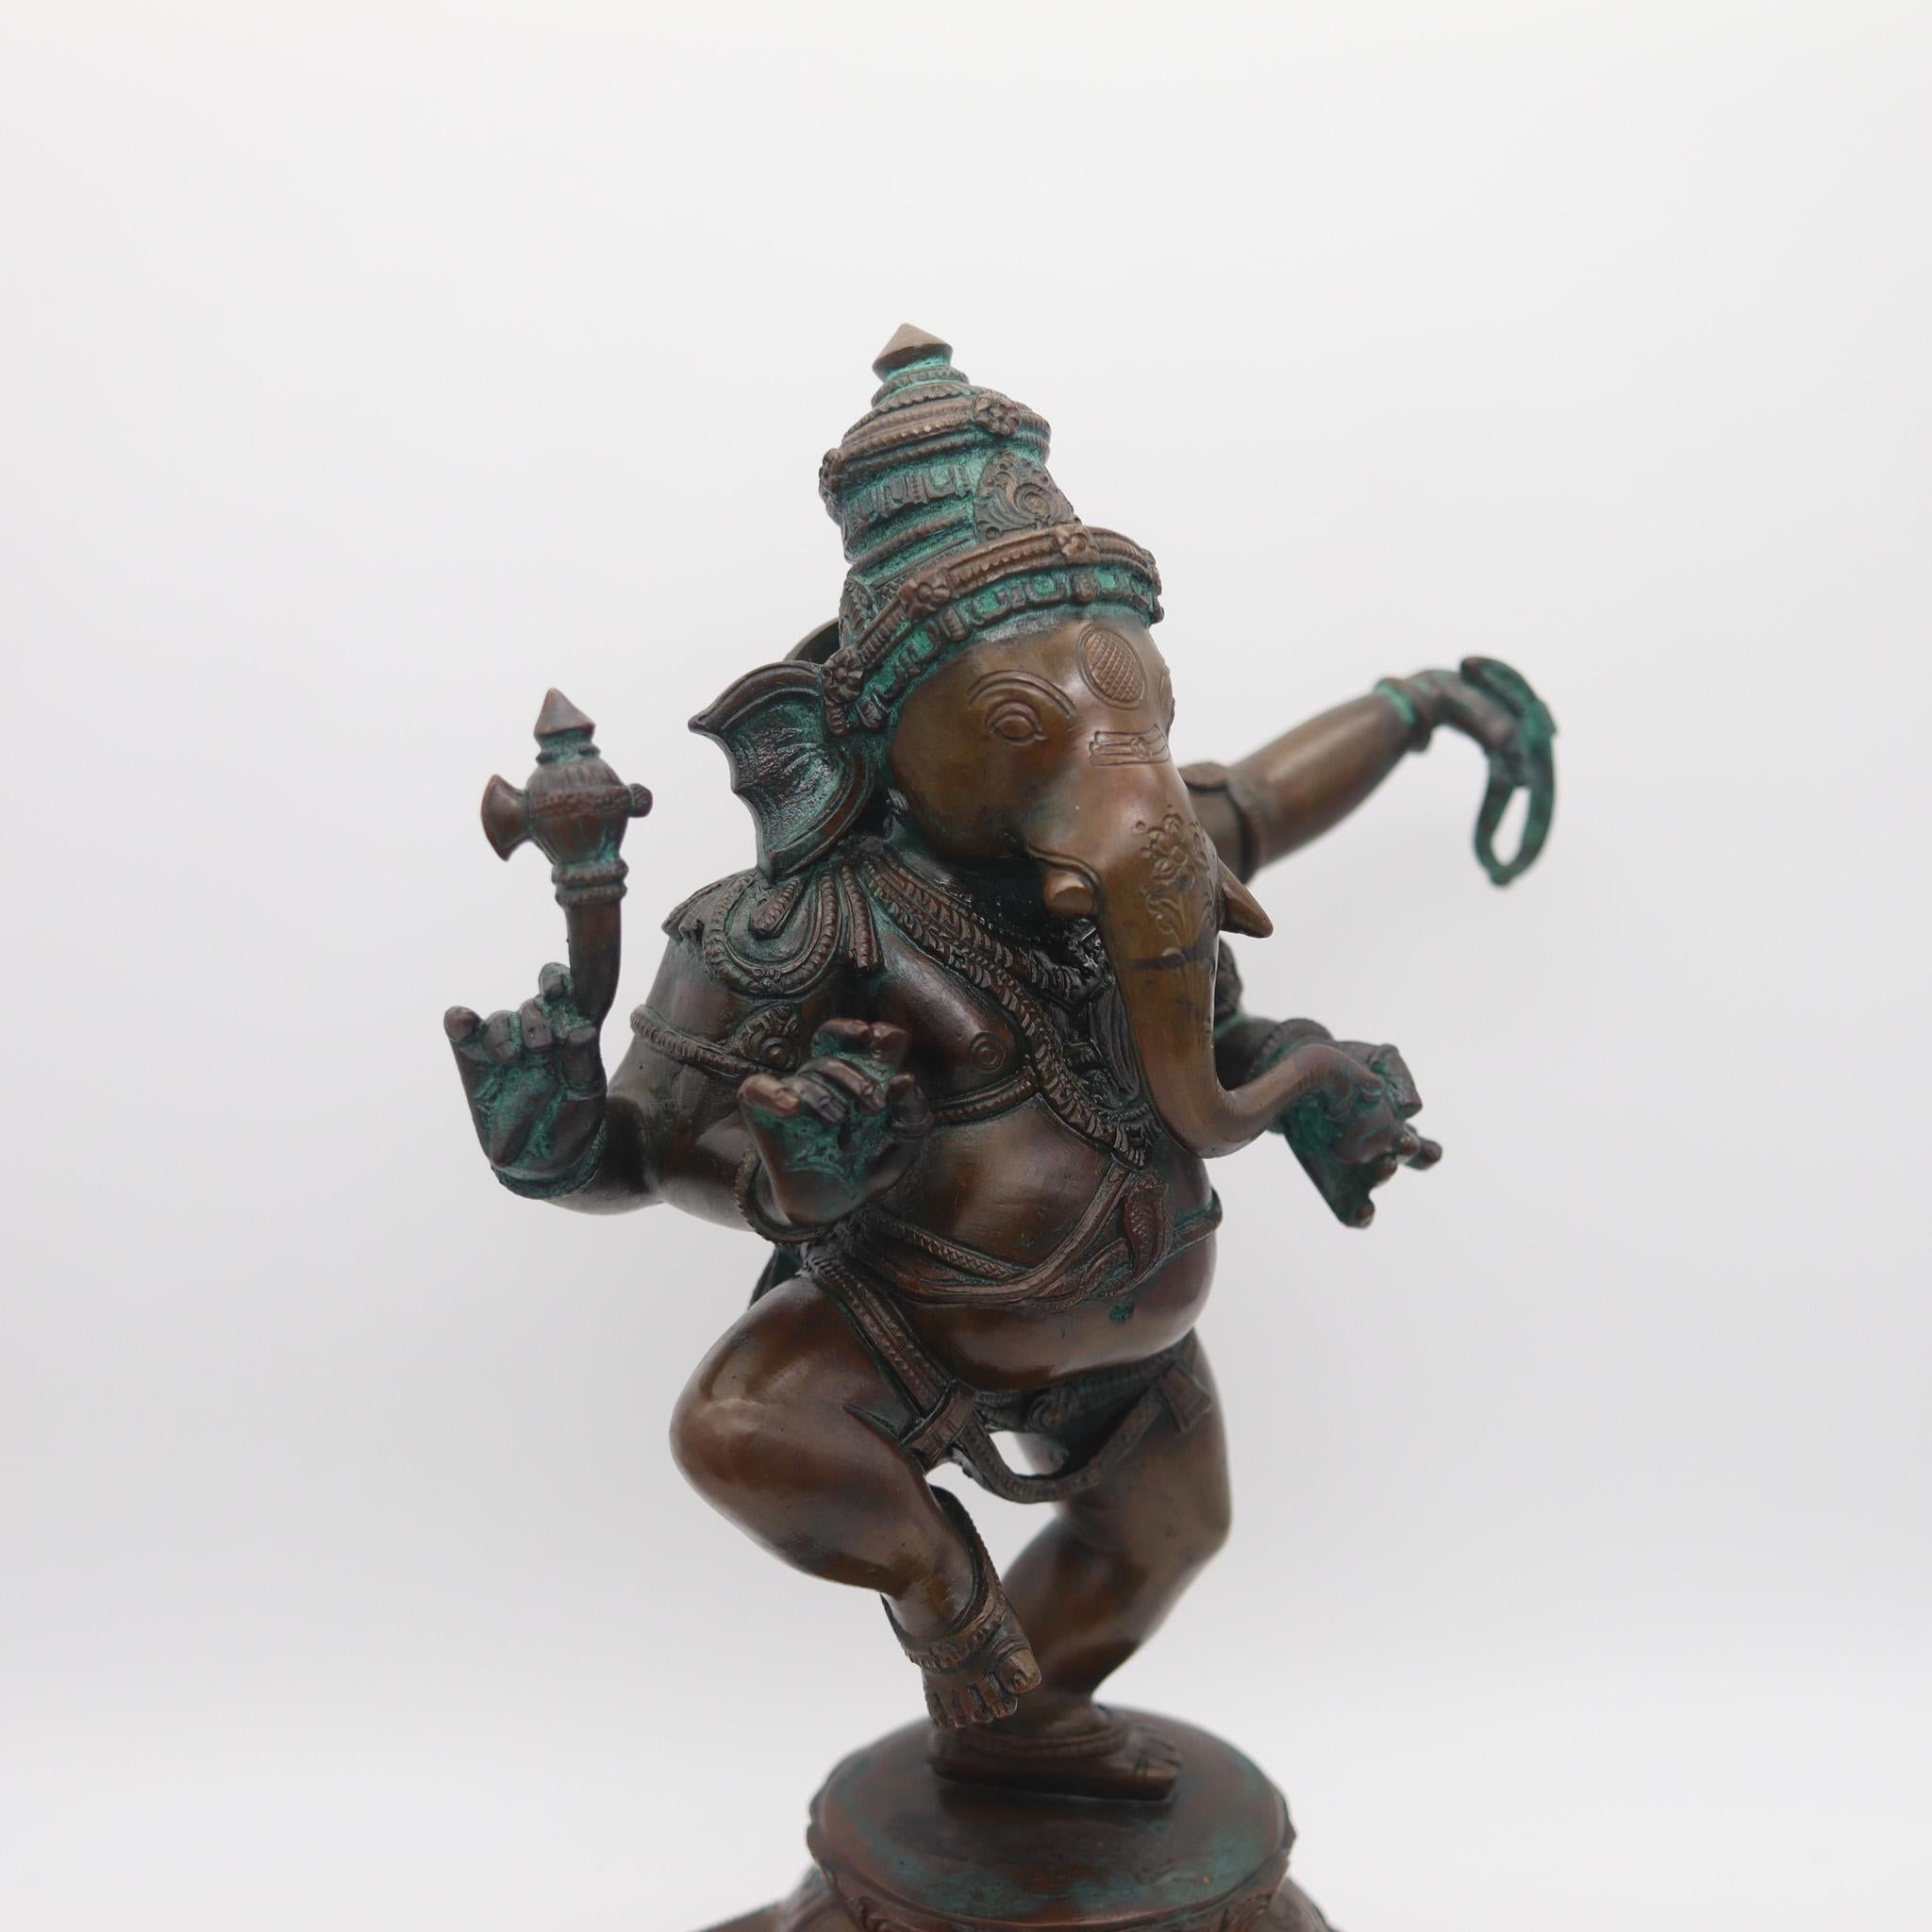 Nepalese-Tibetan sculpture of Ganesha.

A splendid Hindu religious bronze sculpture of a dancing Ganesha of Tibetan or Nepalese origin, created back in the 19th century circa 1850. This statue is similar to the Chola style, highly detailed with